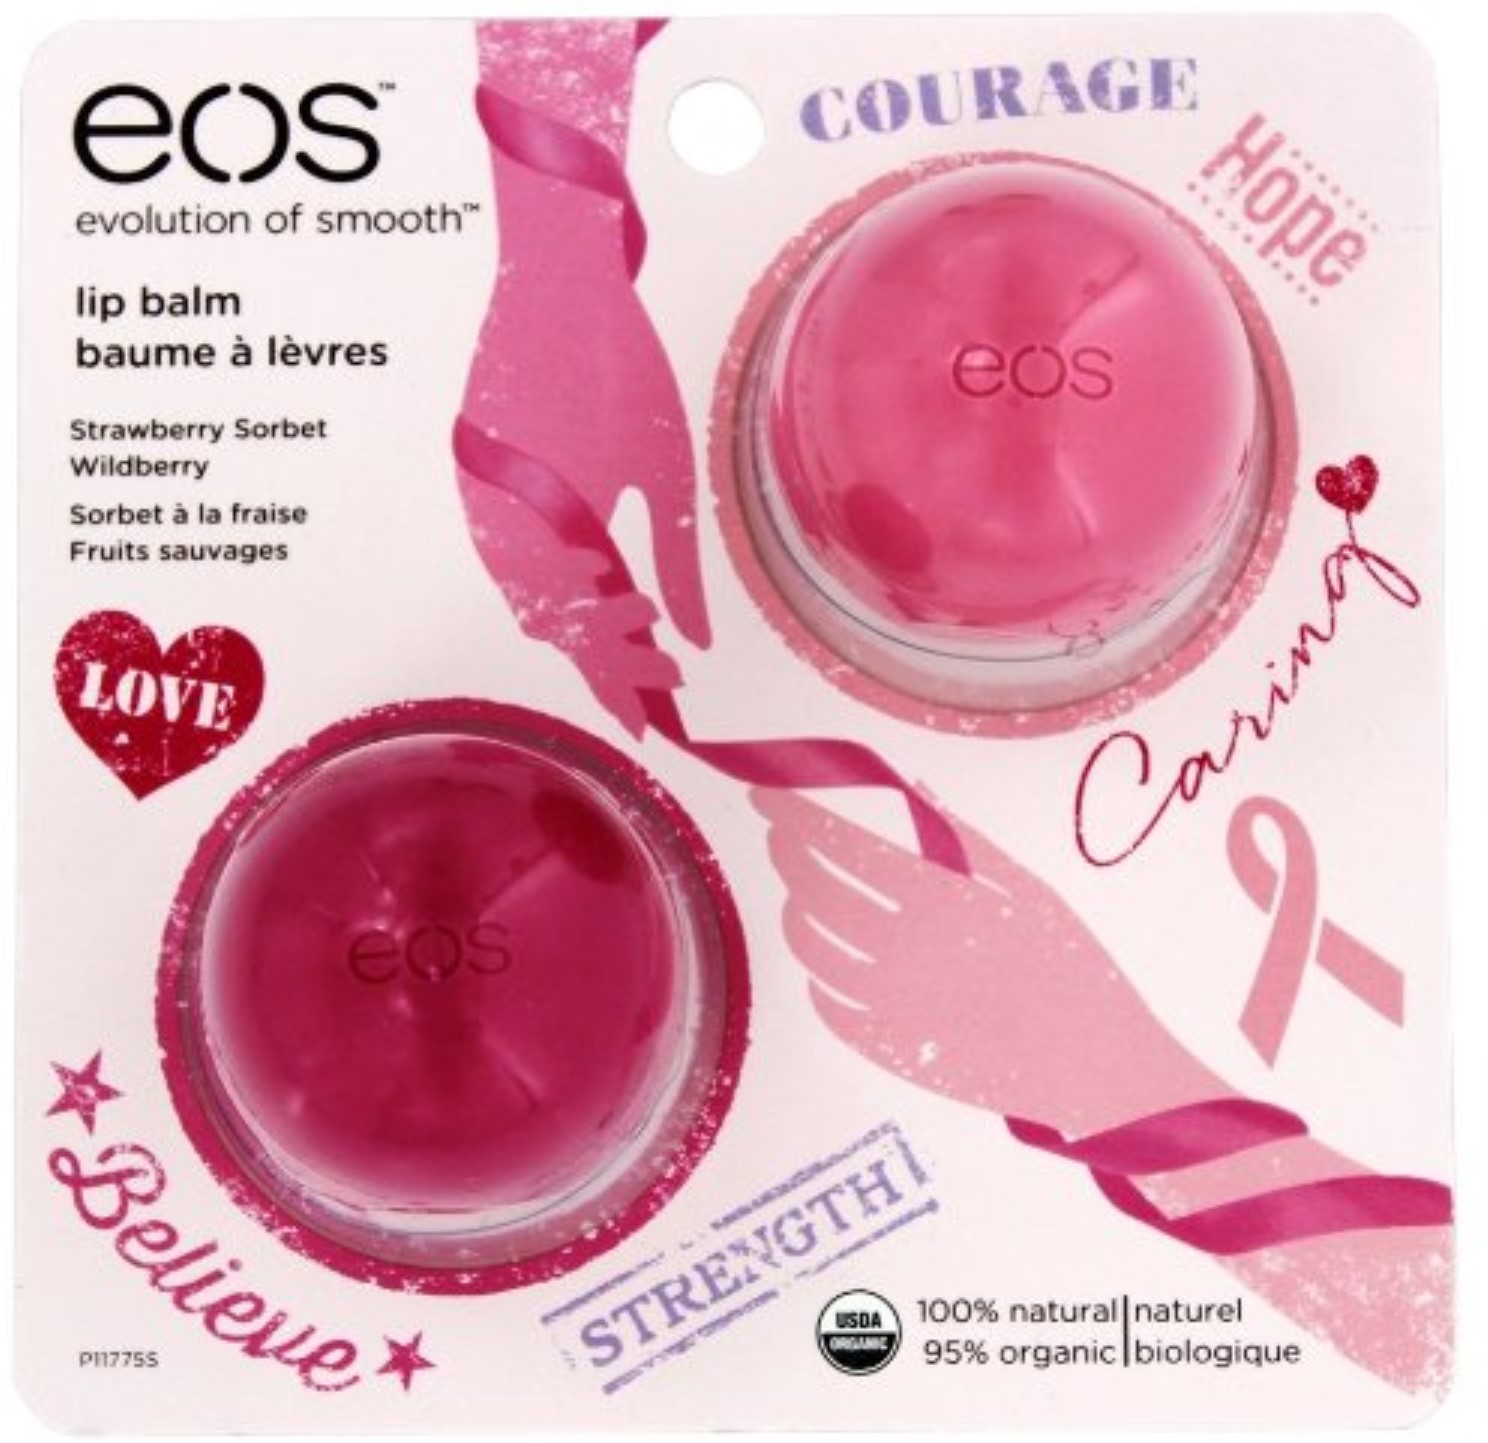 EOS Breast Cancer Awareness Lip Balm, Strawberry Sorbet & Wildberry 2 ea - image 1 of 2